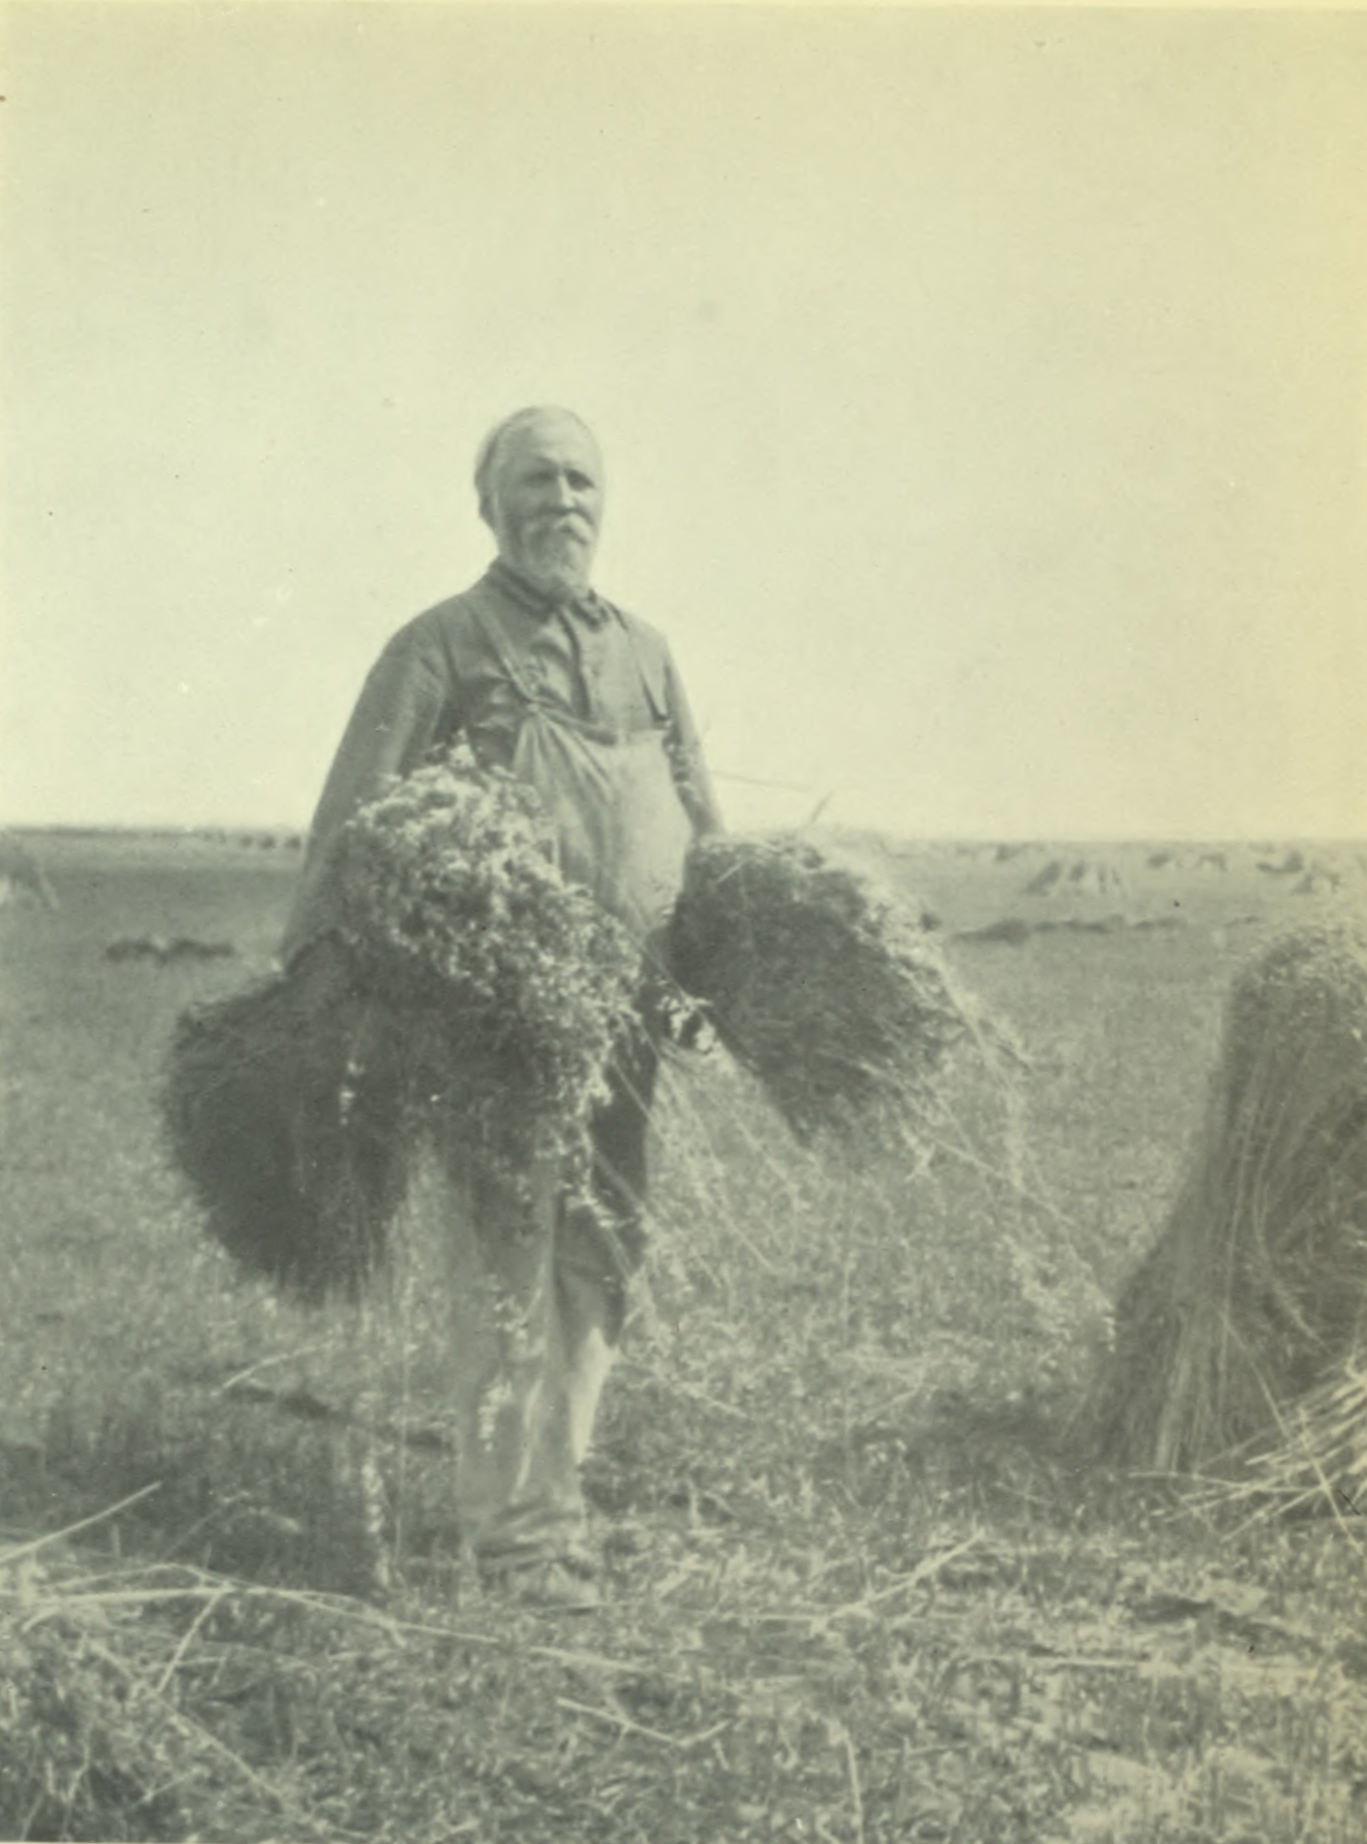 Man smiling, standing tall and proud, each hand filled with grain.